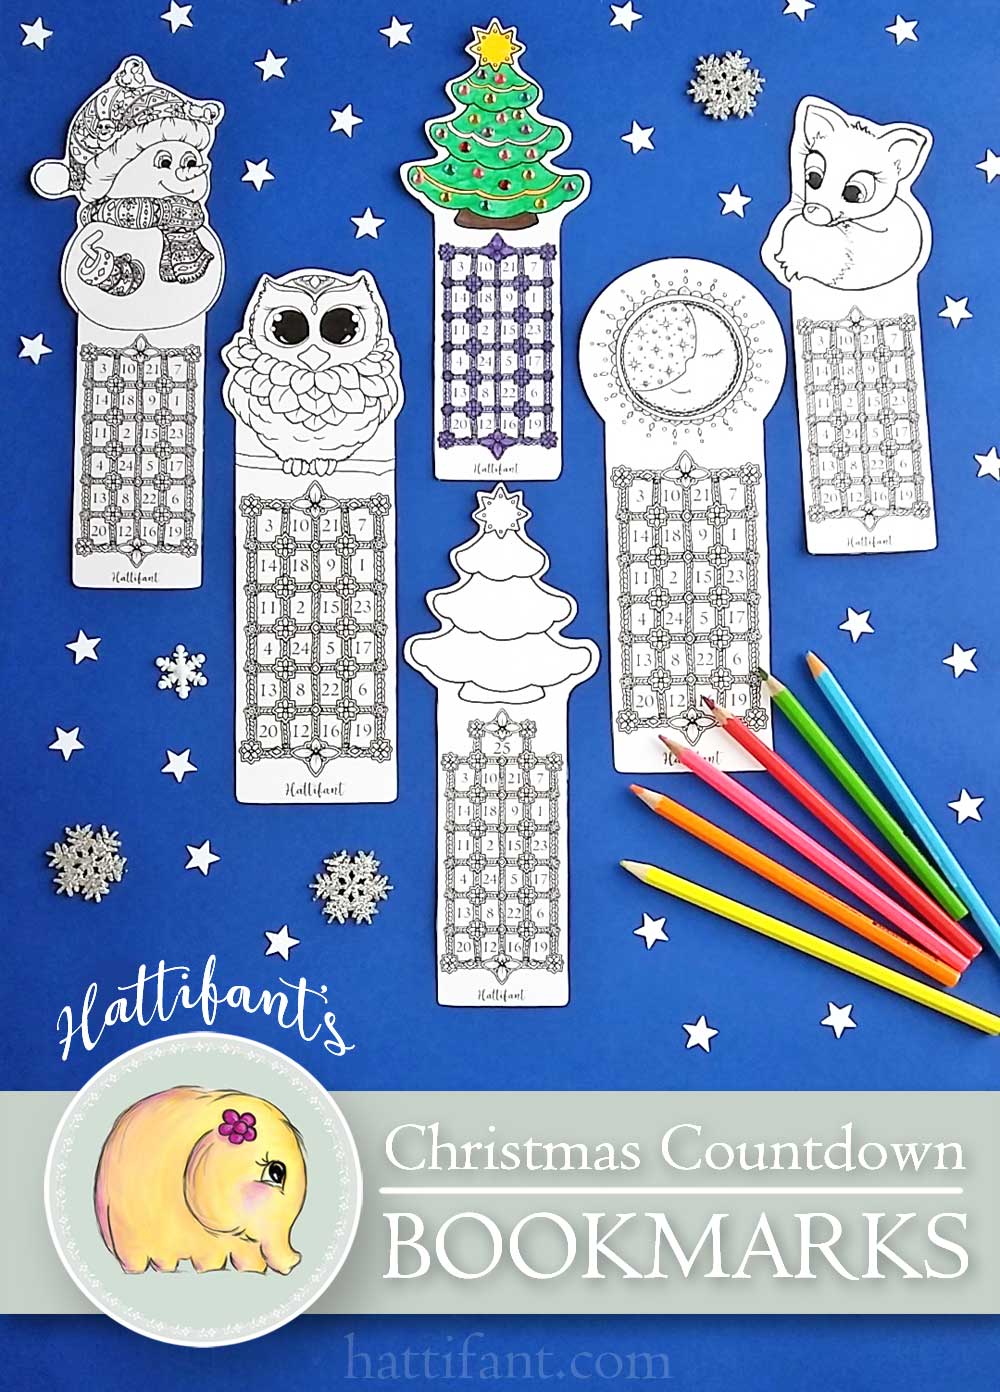 Hattifant's Christmas Countdown Bookmarks to Print and Color